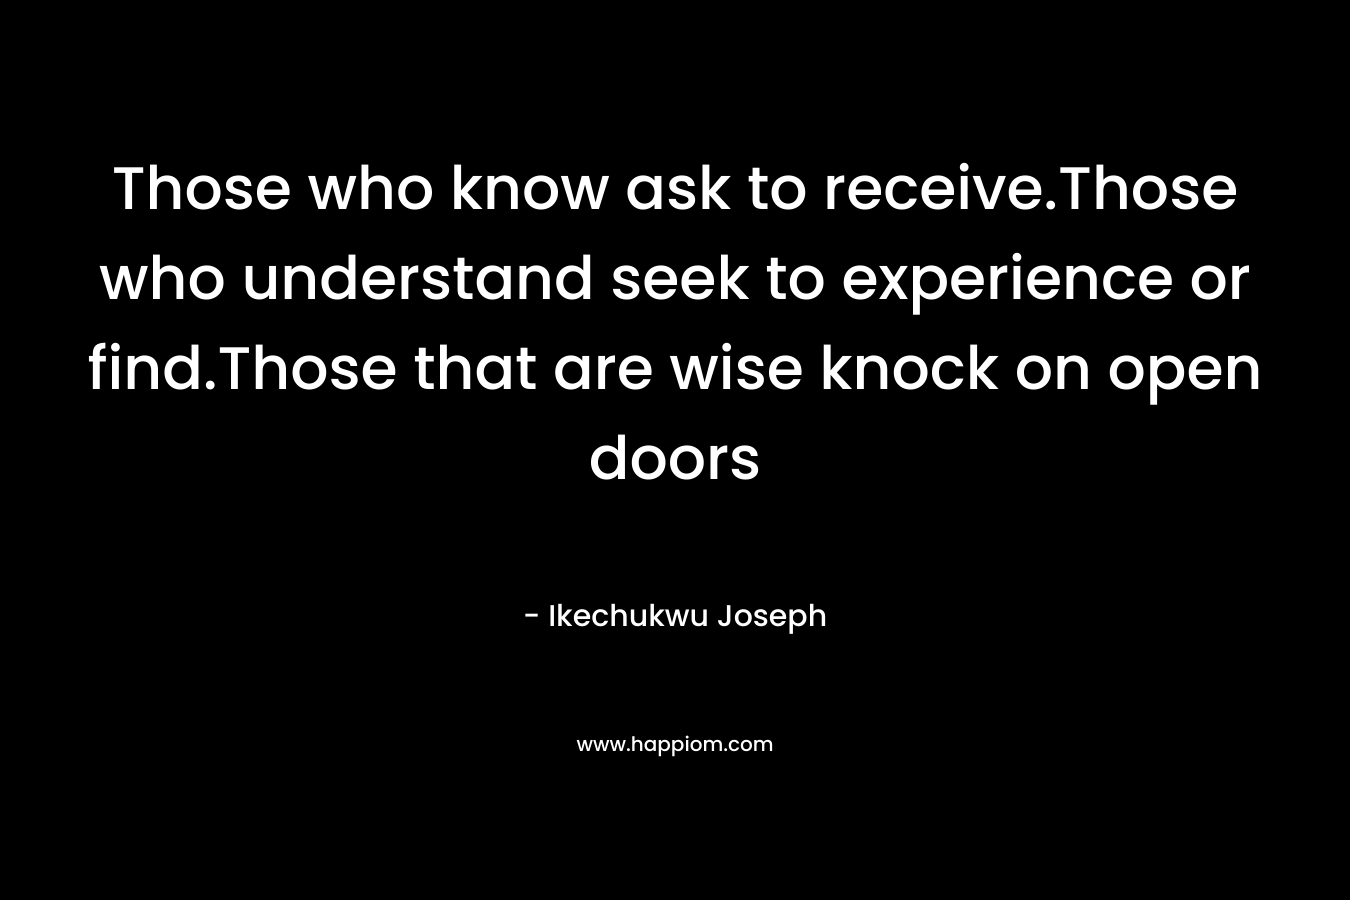 Those who know ask to receive.Those who understand seek to experience or find.Those that are wise knock on open doors